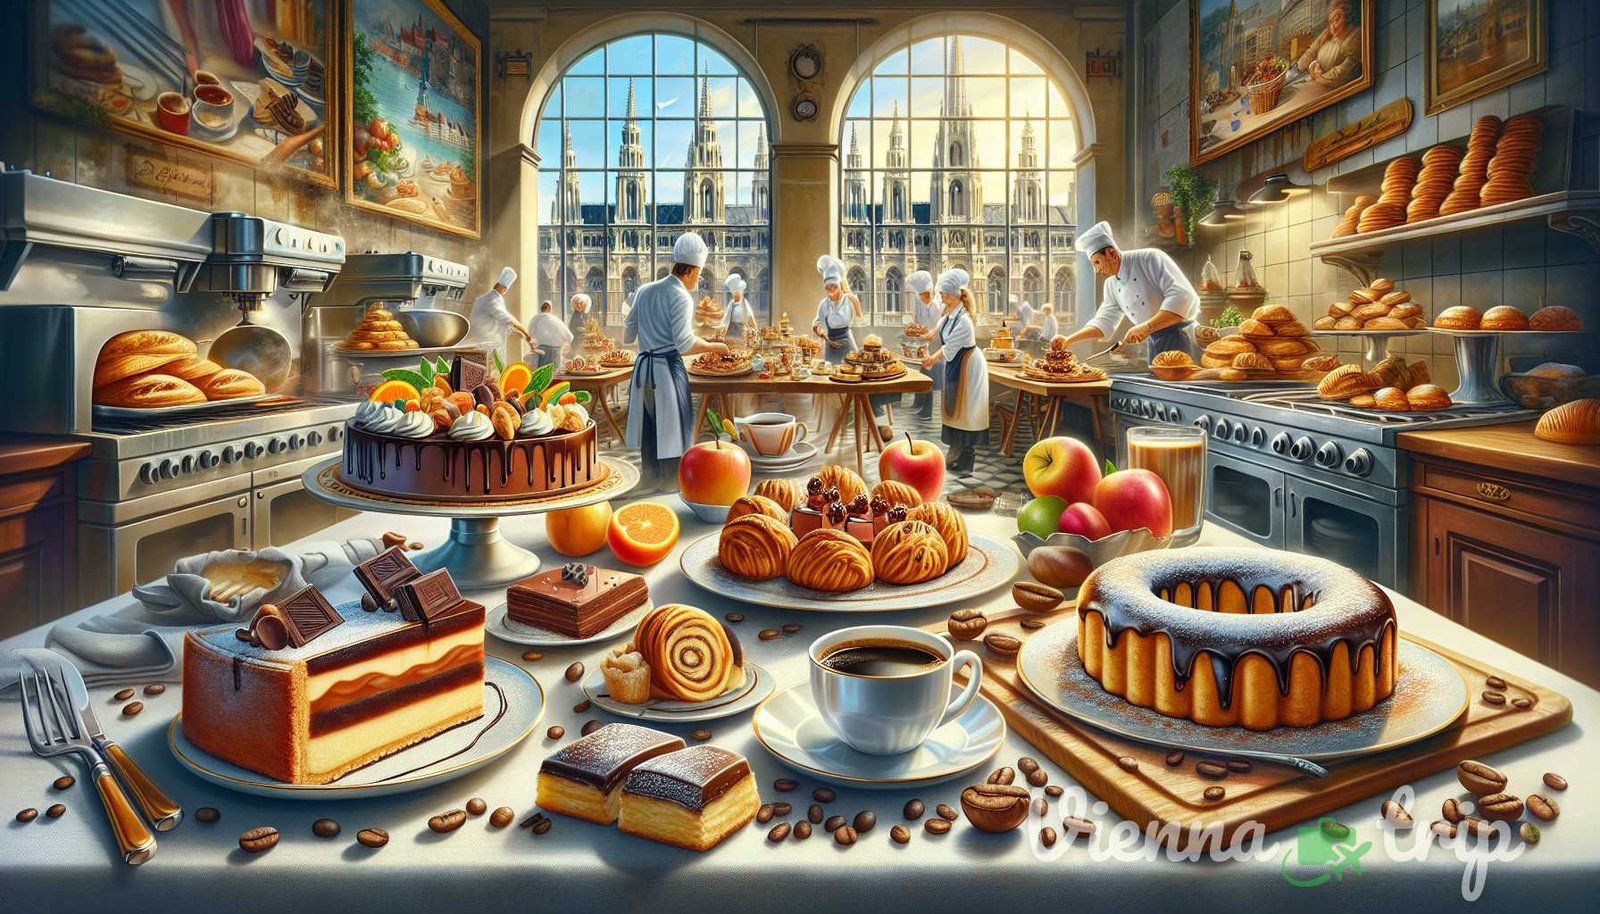 Illustration for section: Italian Cuisine: Italy's influence on Viennese cuisine can be traced back to the 16th century when I - vienna delights